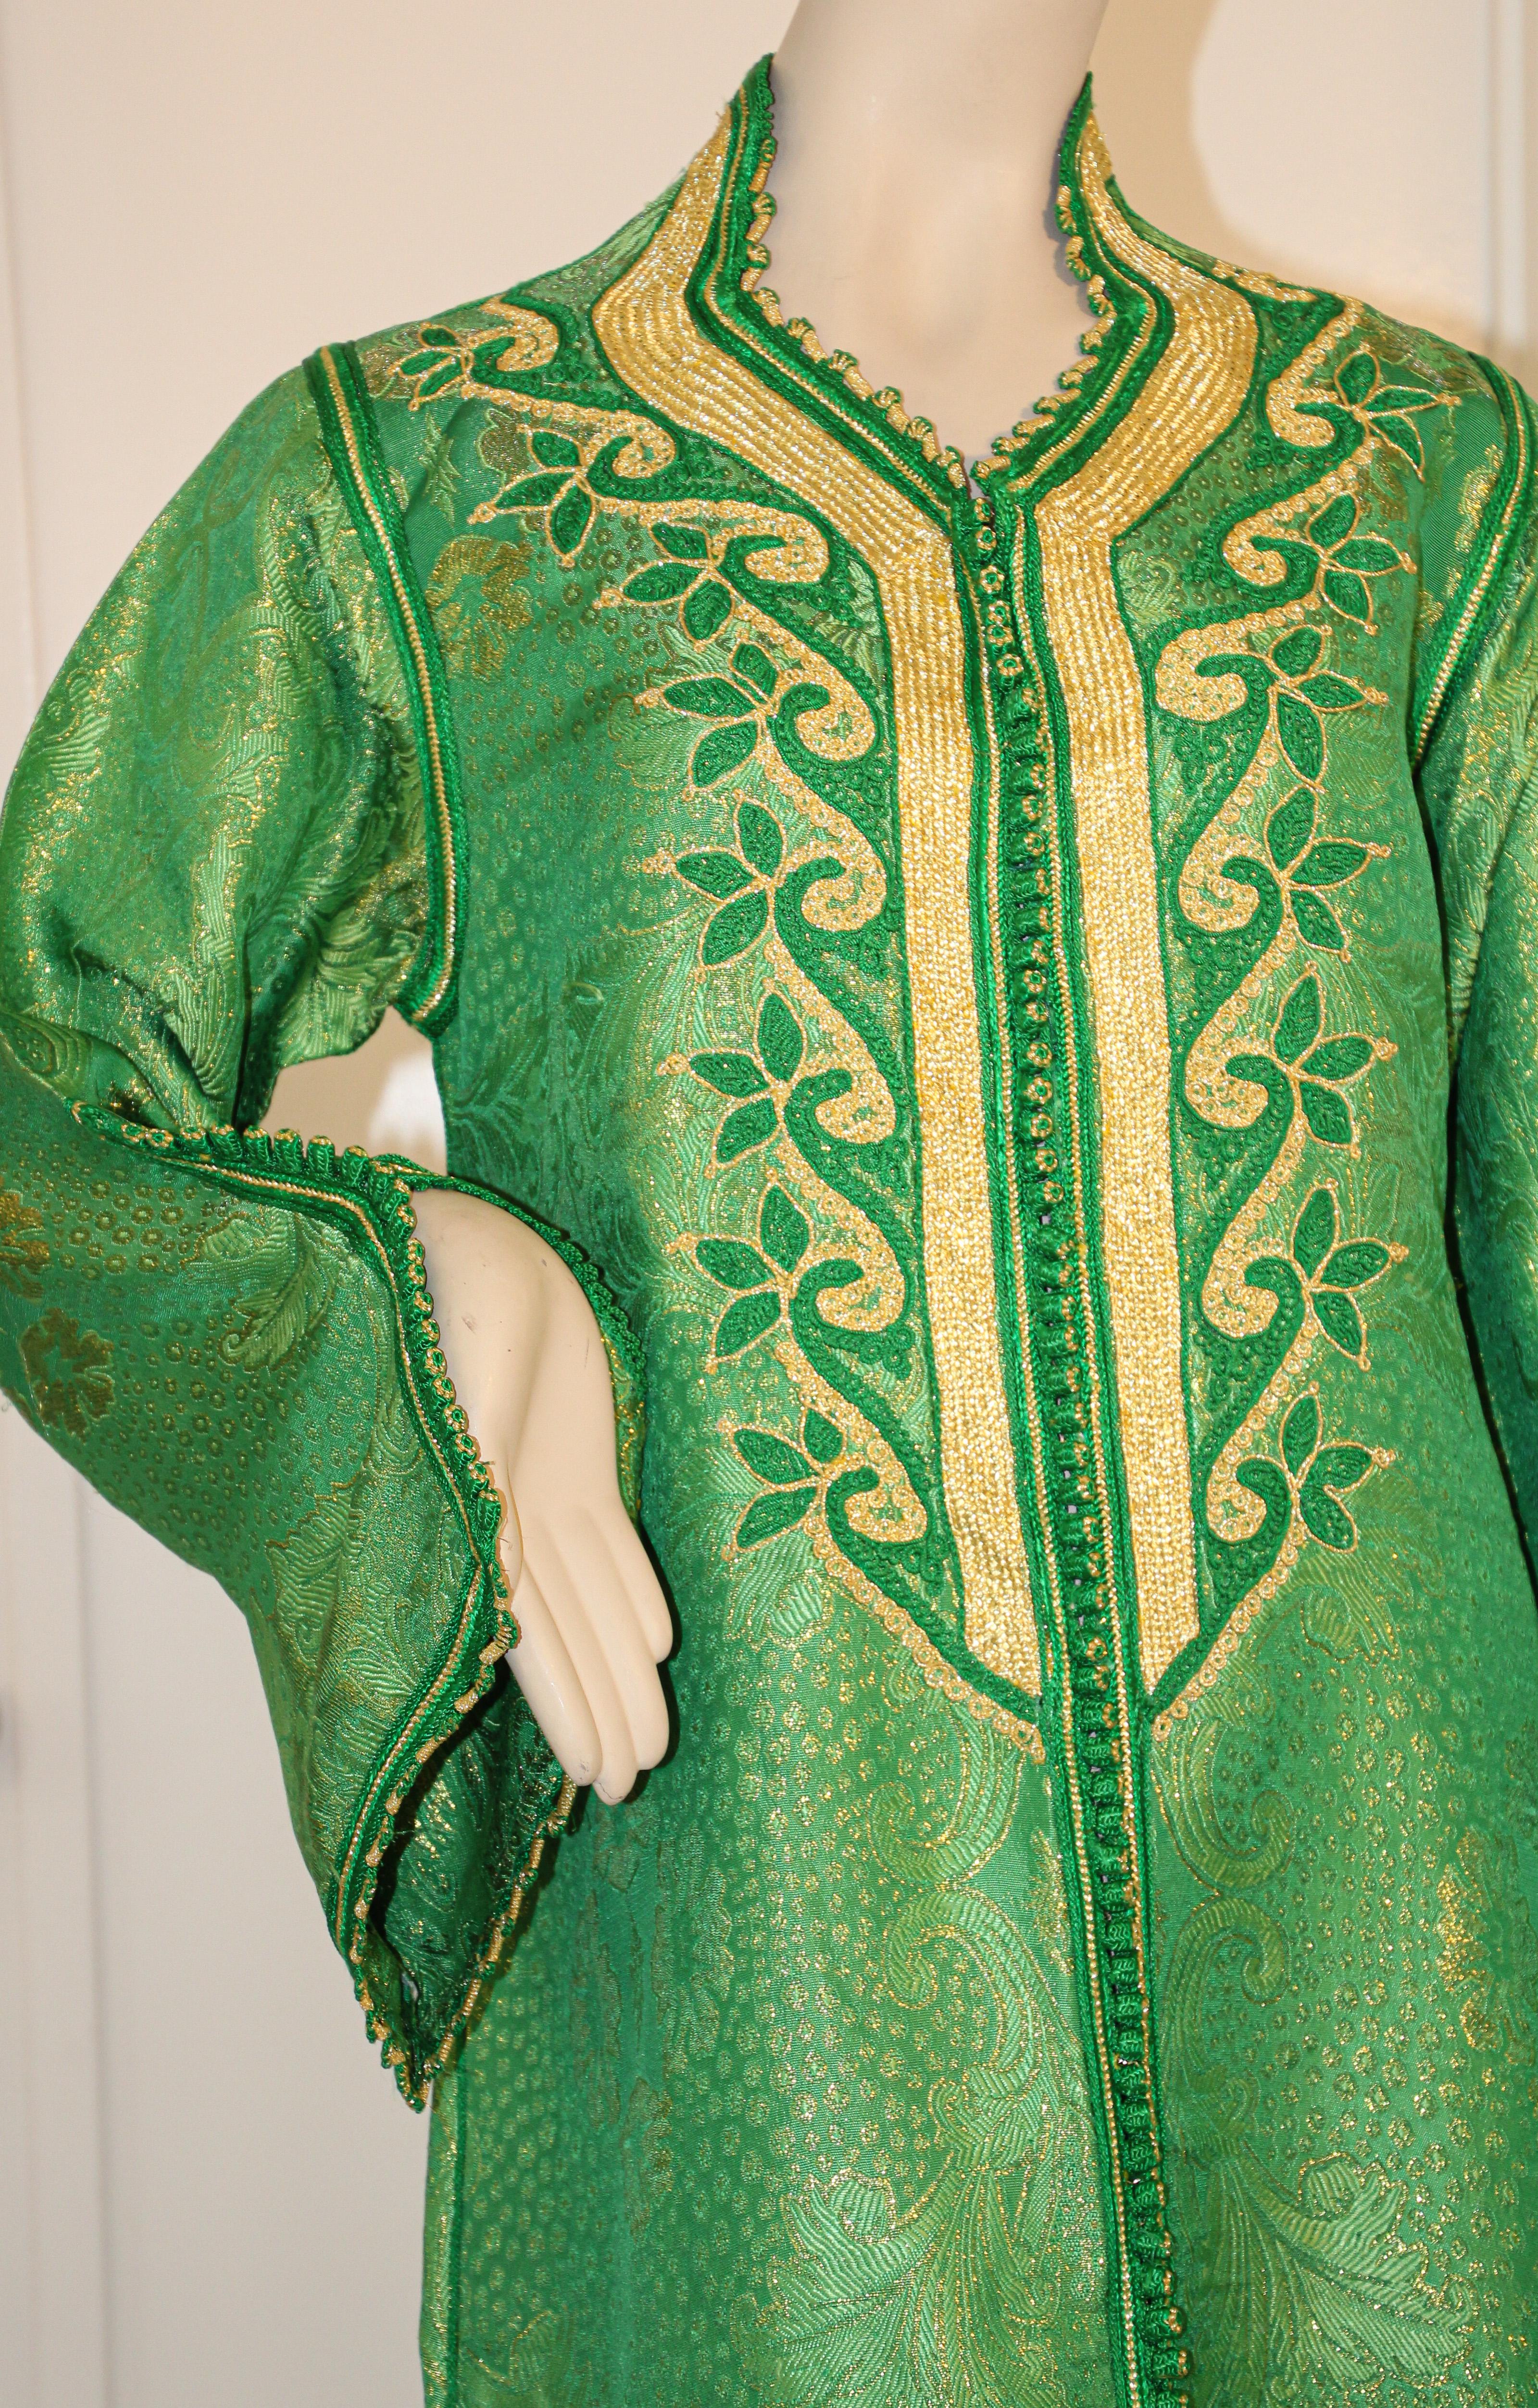 Elegant Moroccan Caftan Emerald Green and Gold Metallic Brocade In Good Condition For Sale In North Hollywood, CA